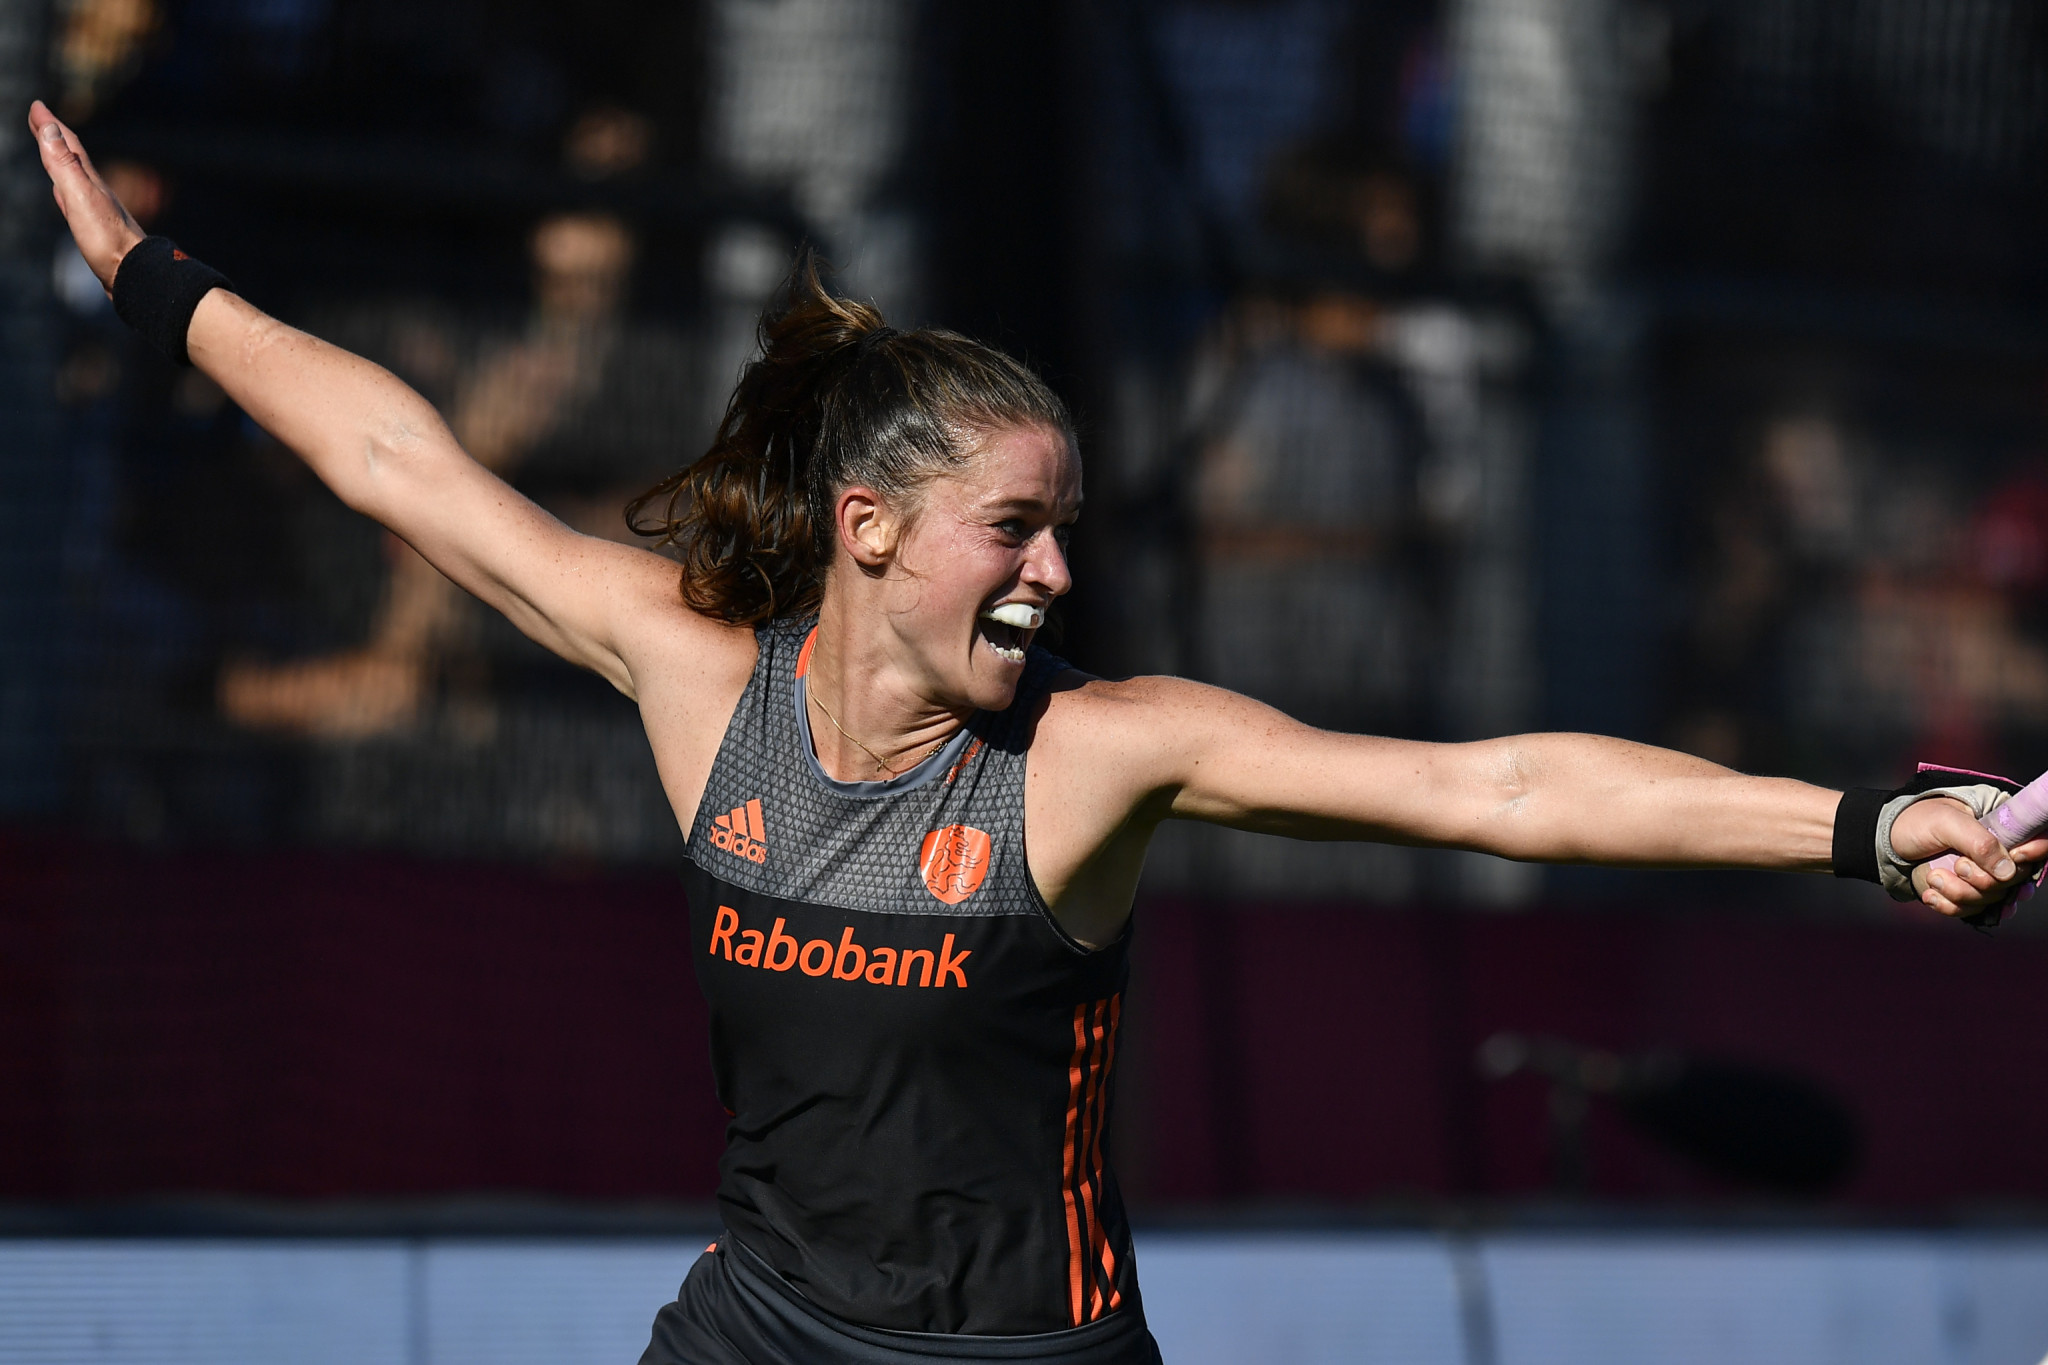 The Netherlands currently head the women's world rankings ©Getty Images